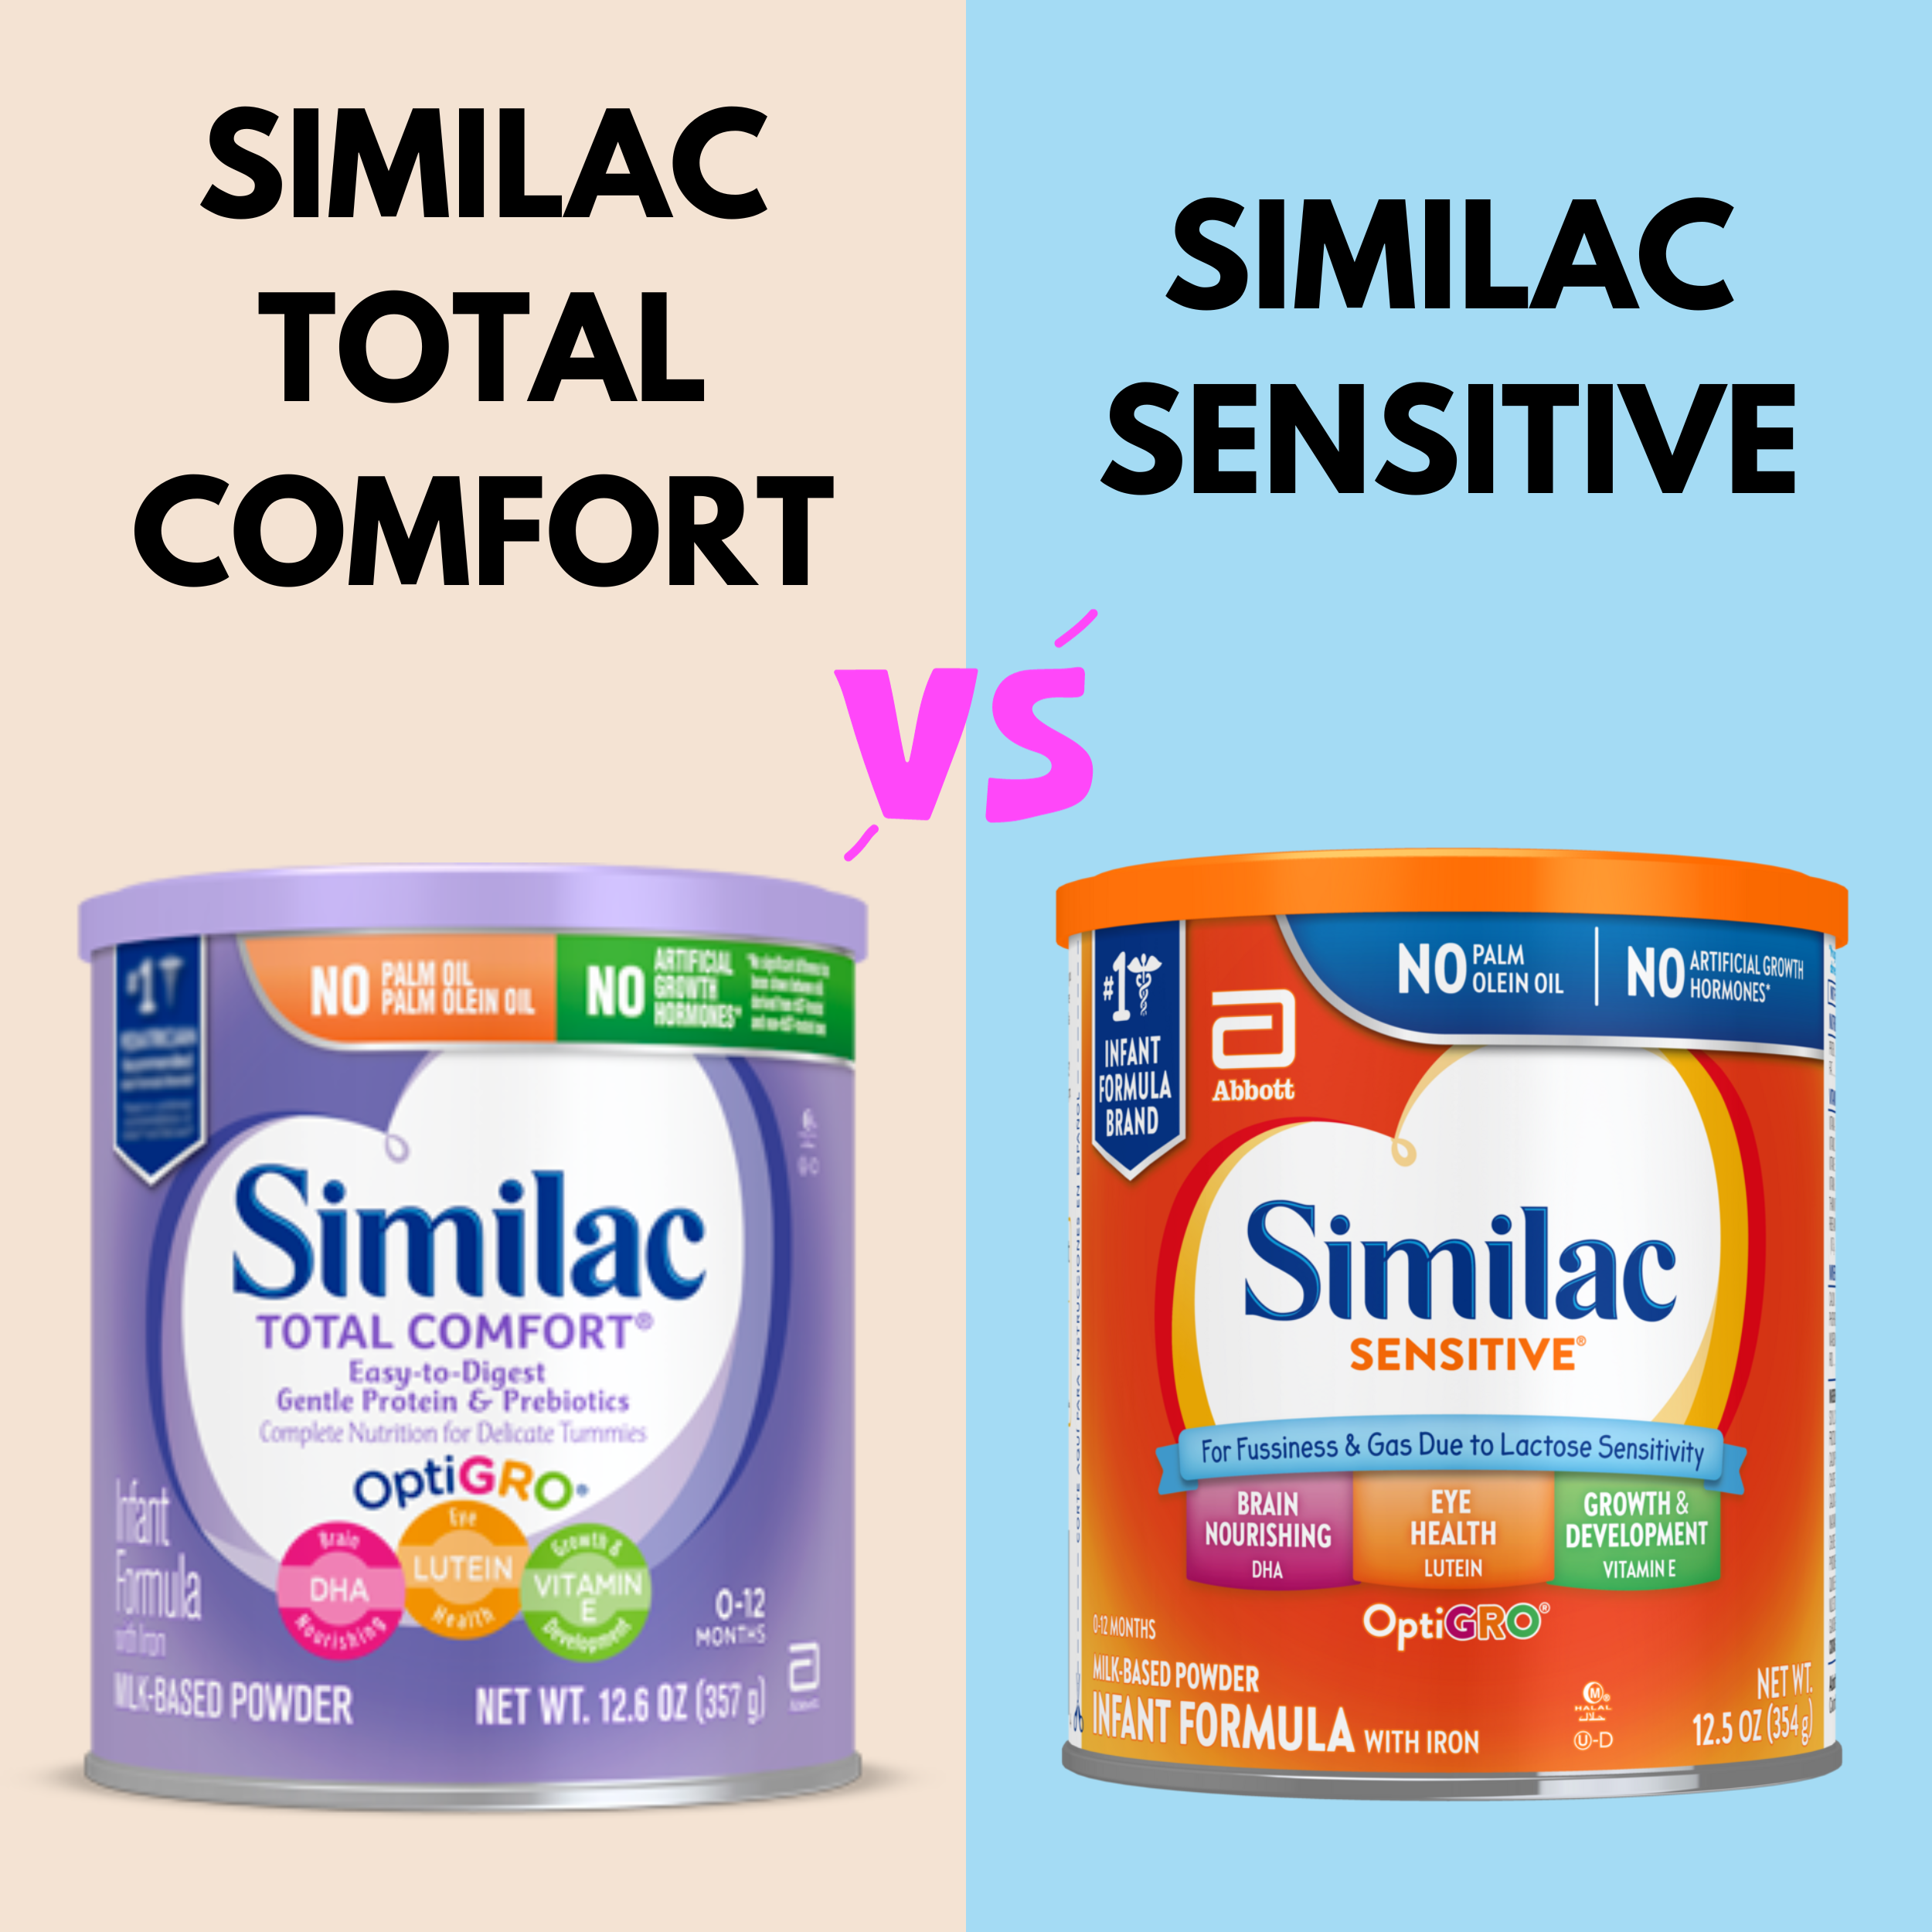 You are currently viewing Similac Sensitive Vs. Similac Total Comfort: Which One is The Best?